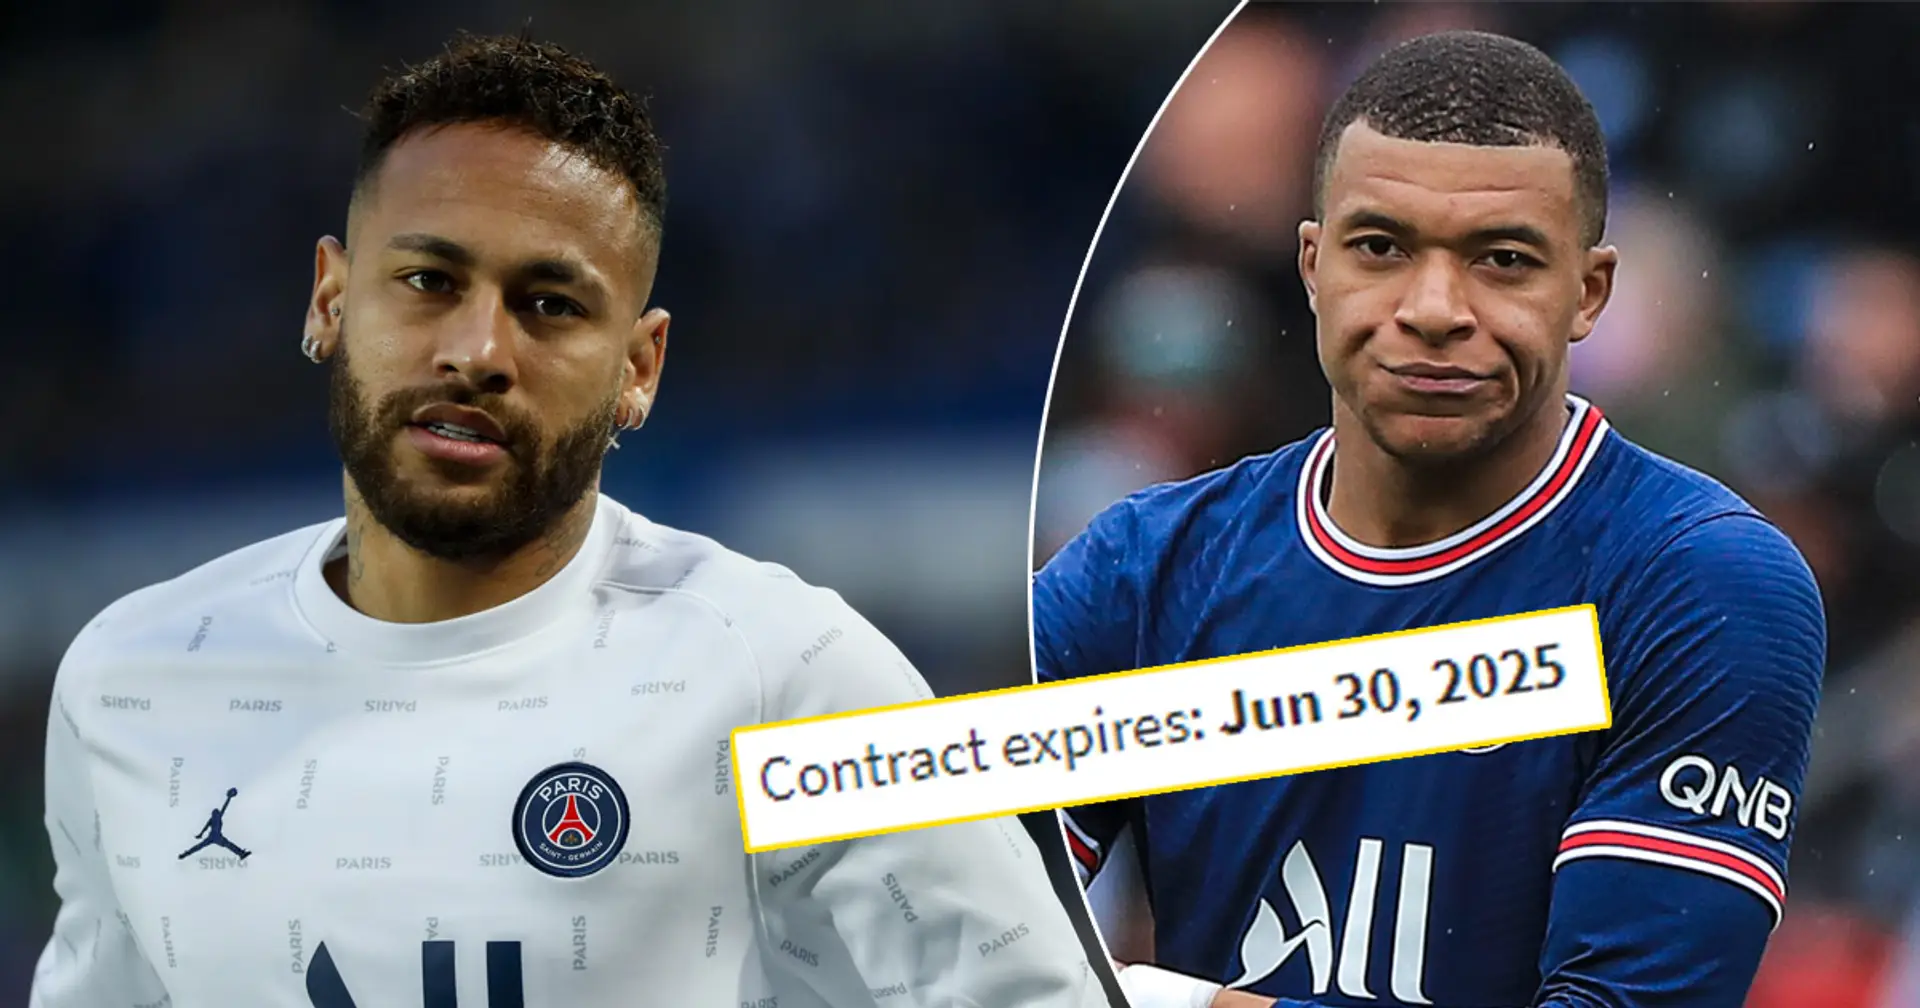 Neymar offered to Barca as PSG promise Mbappe to sell him (reliability: 3 stars)